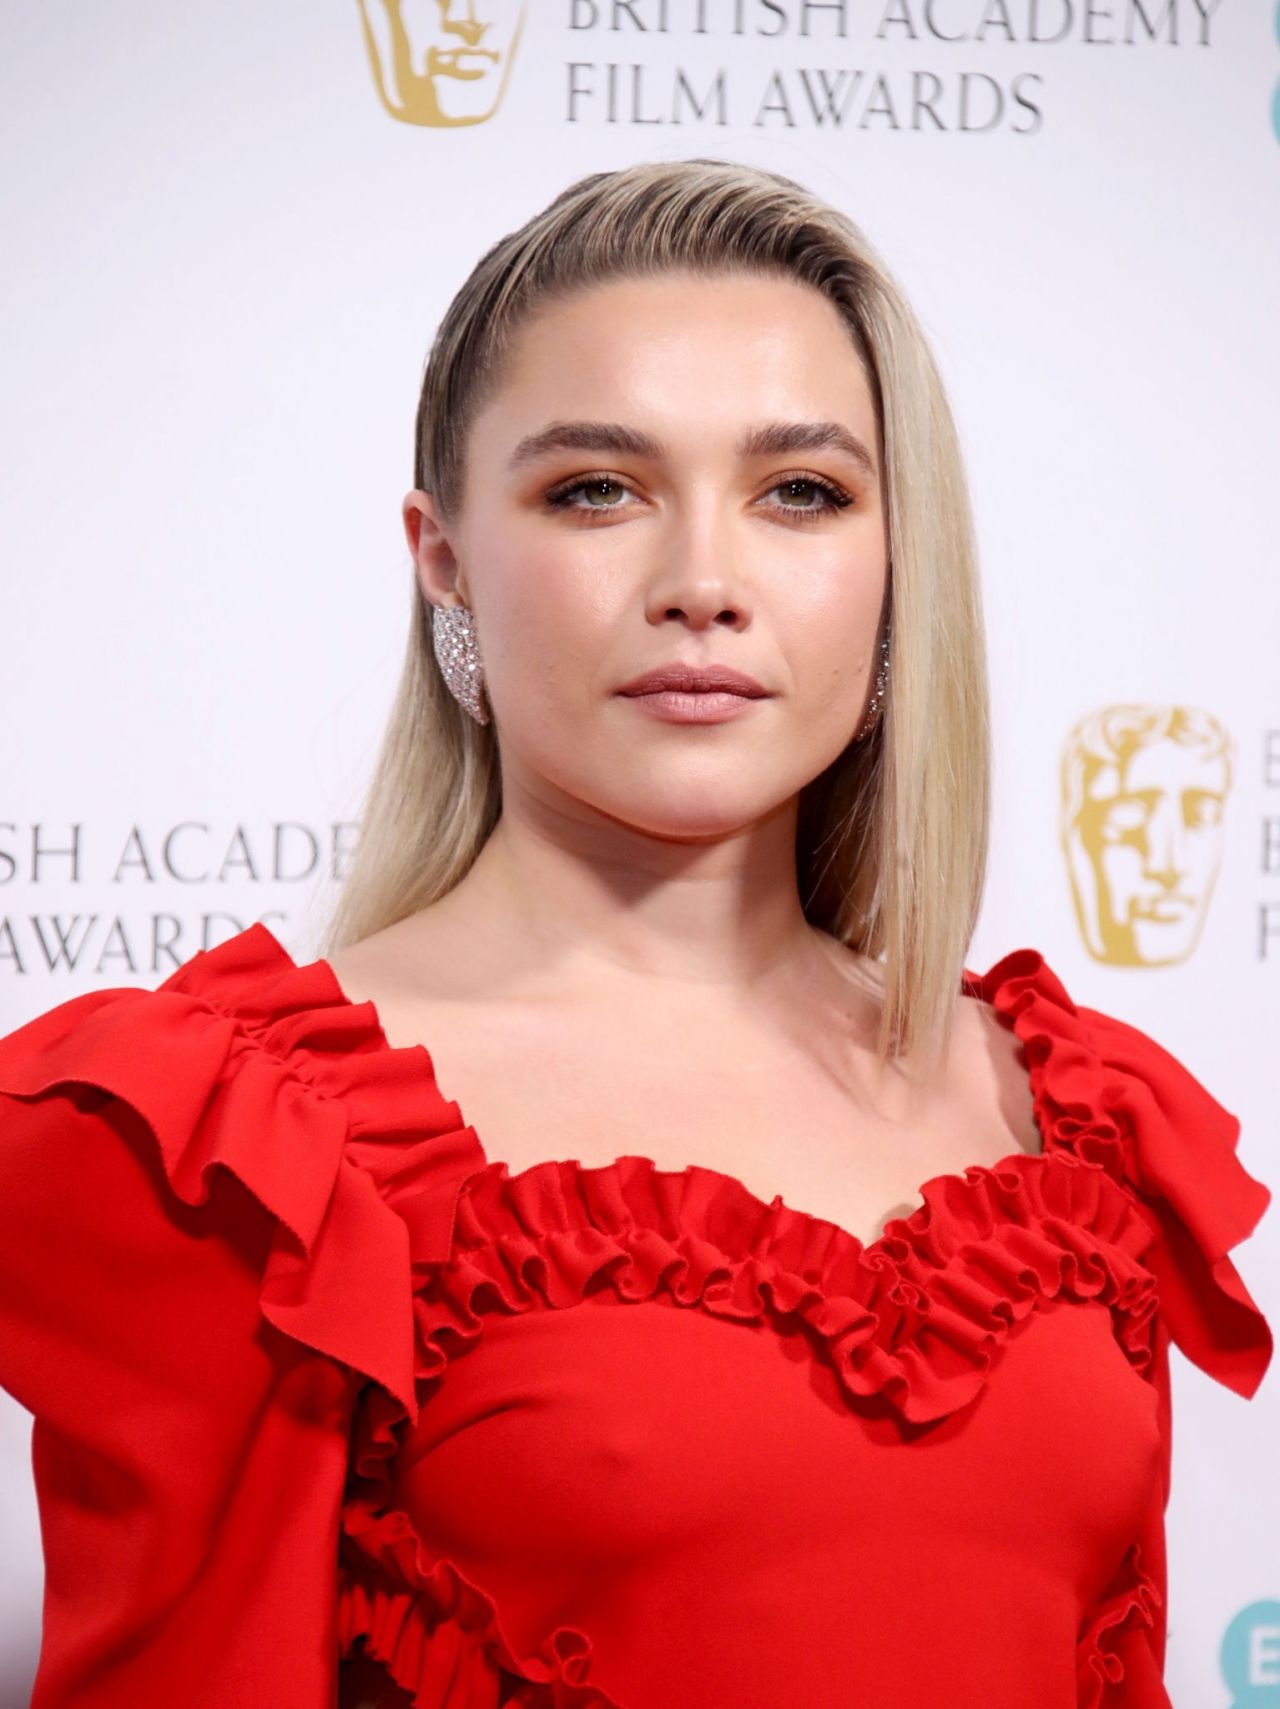 Florence Pugh - British Academy Film Awards Nominees Party 